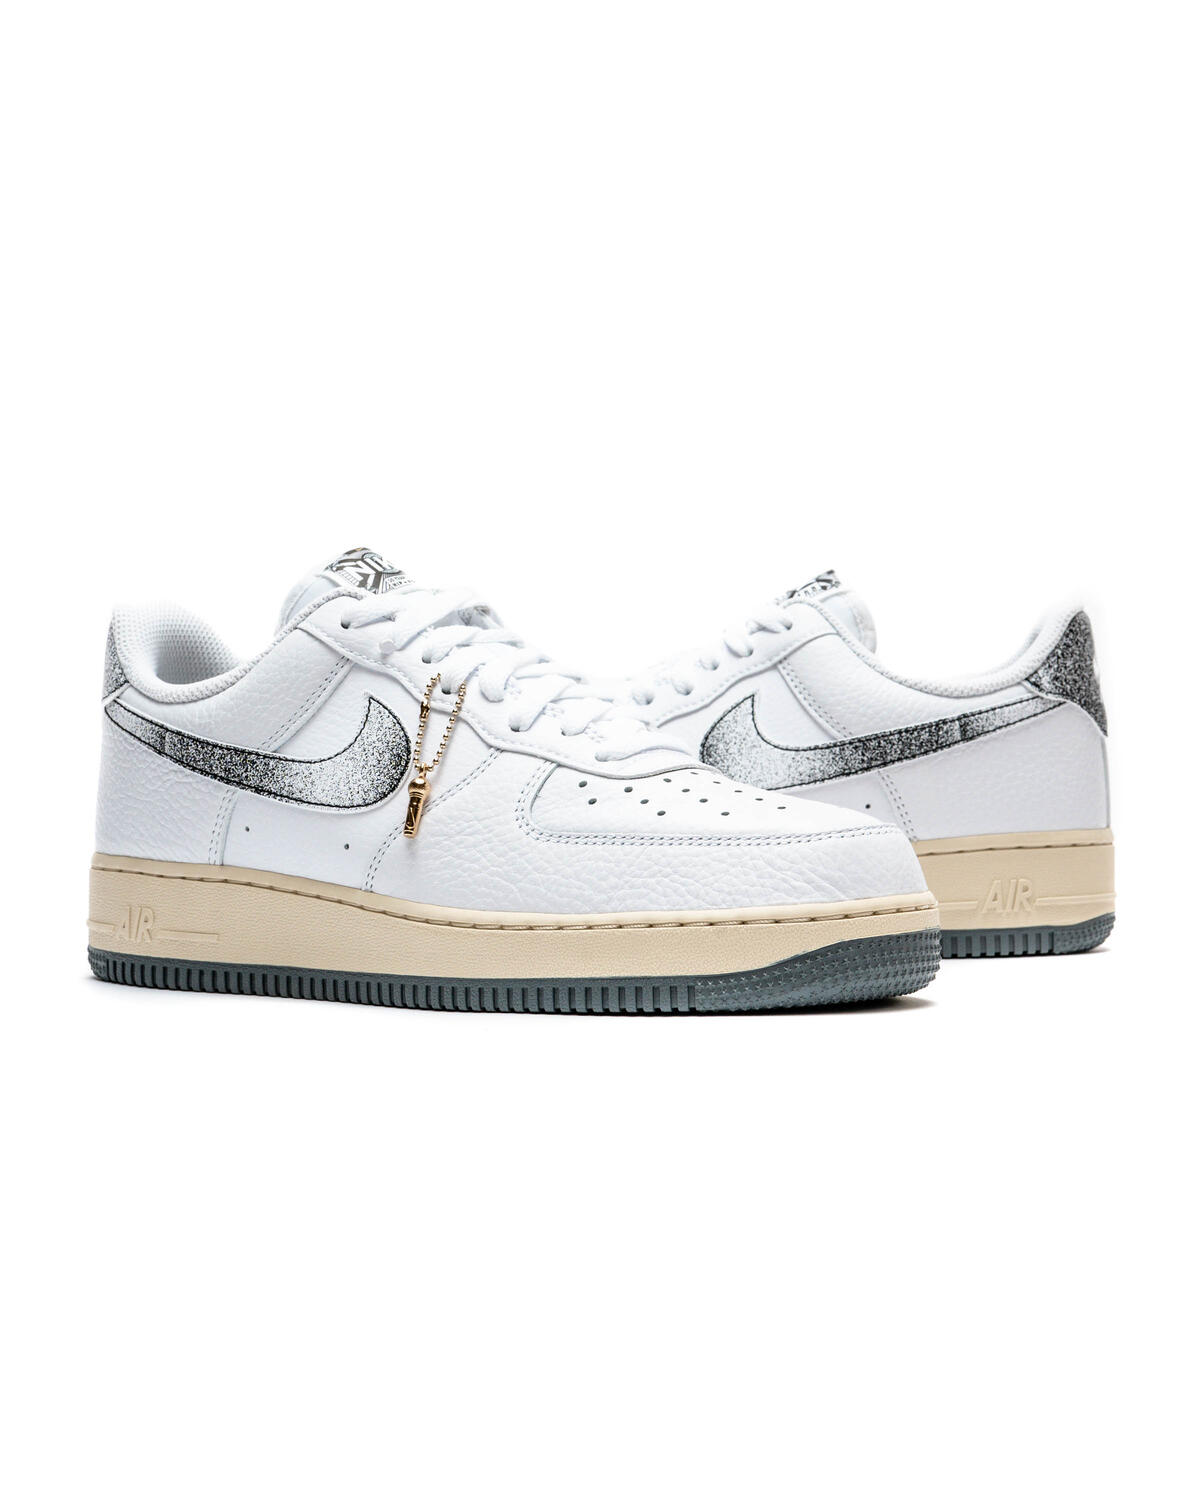 Sale!! Vintage Nike AF-1 '82 footwear Air Force 1 low white trainers  basketball tennis shoes Us 11 Uk 10 Eur 44 Free Shipping within the USA